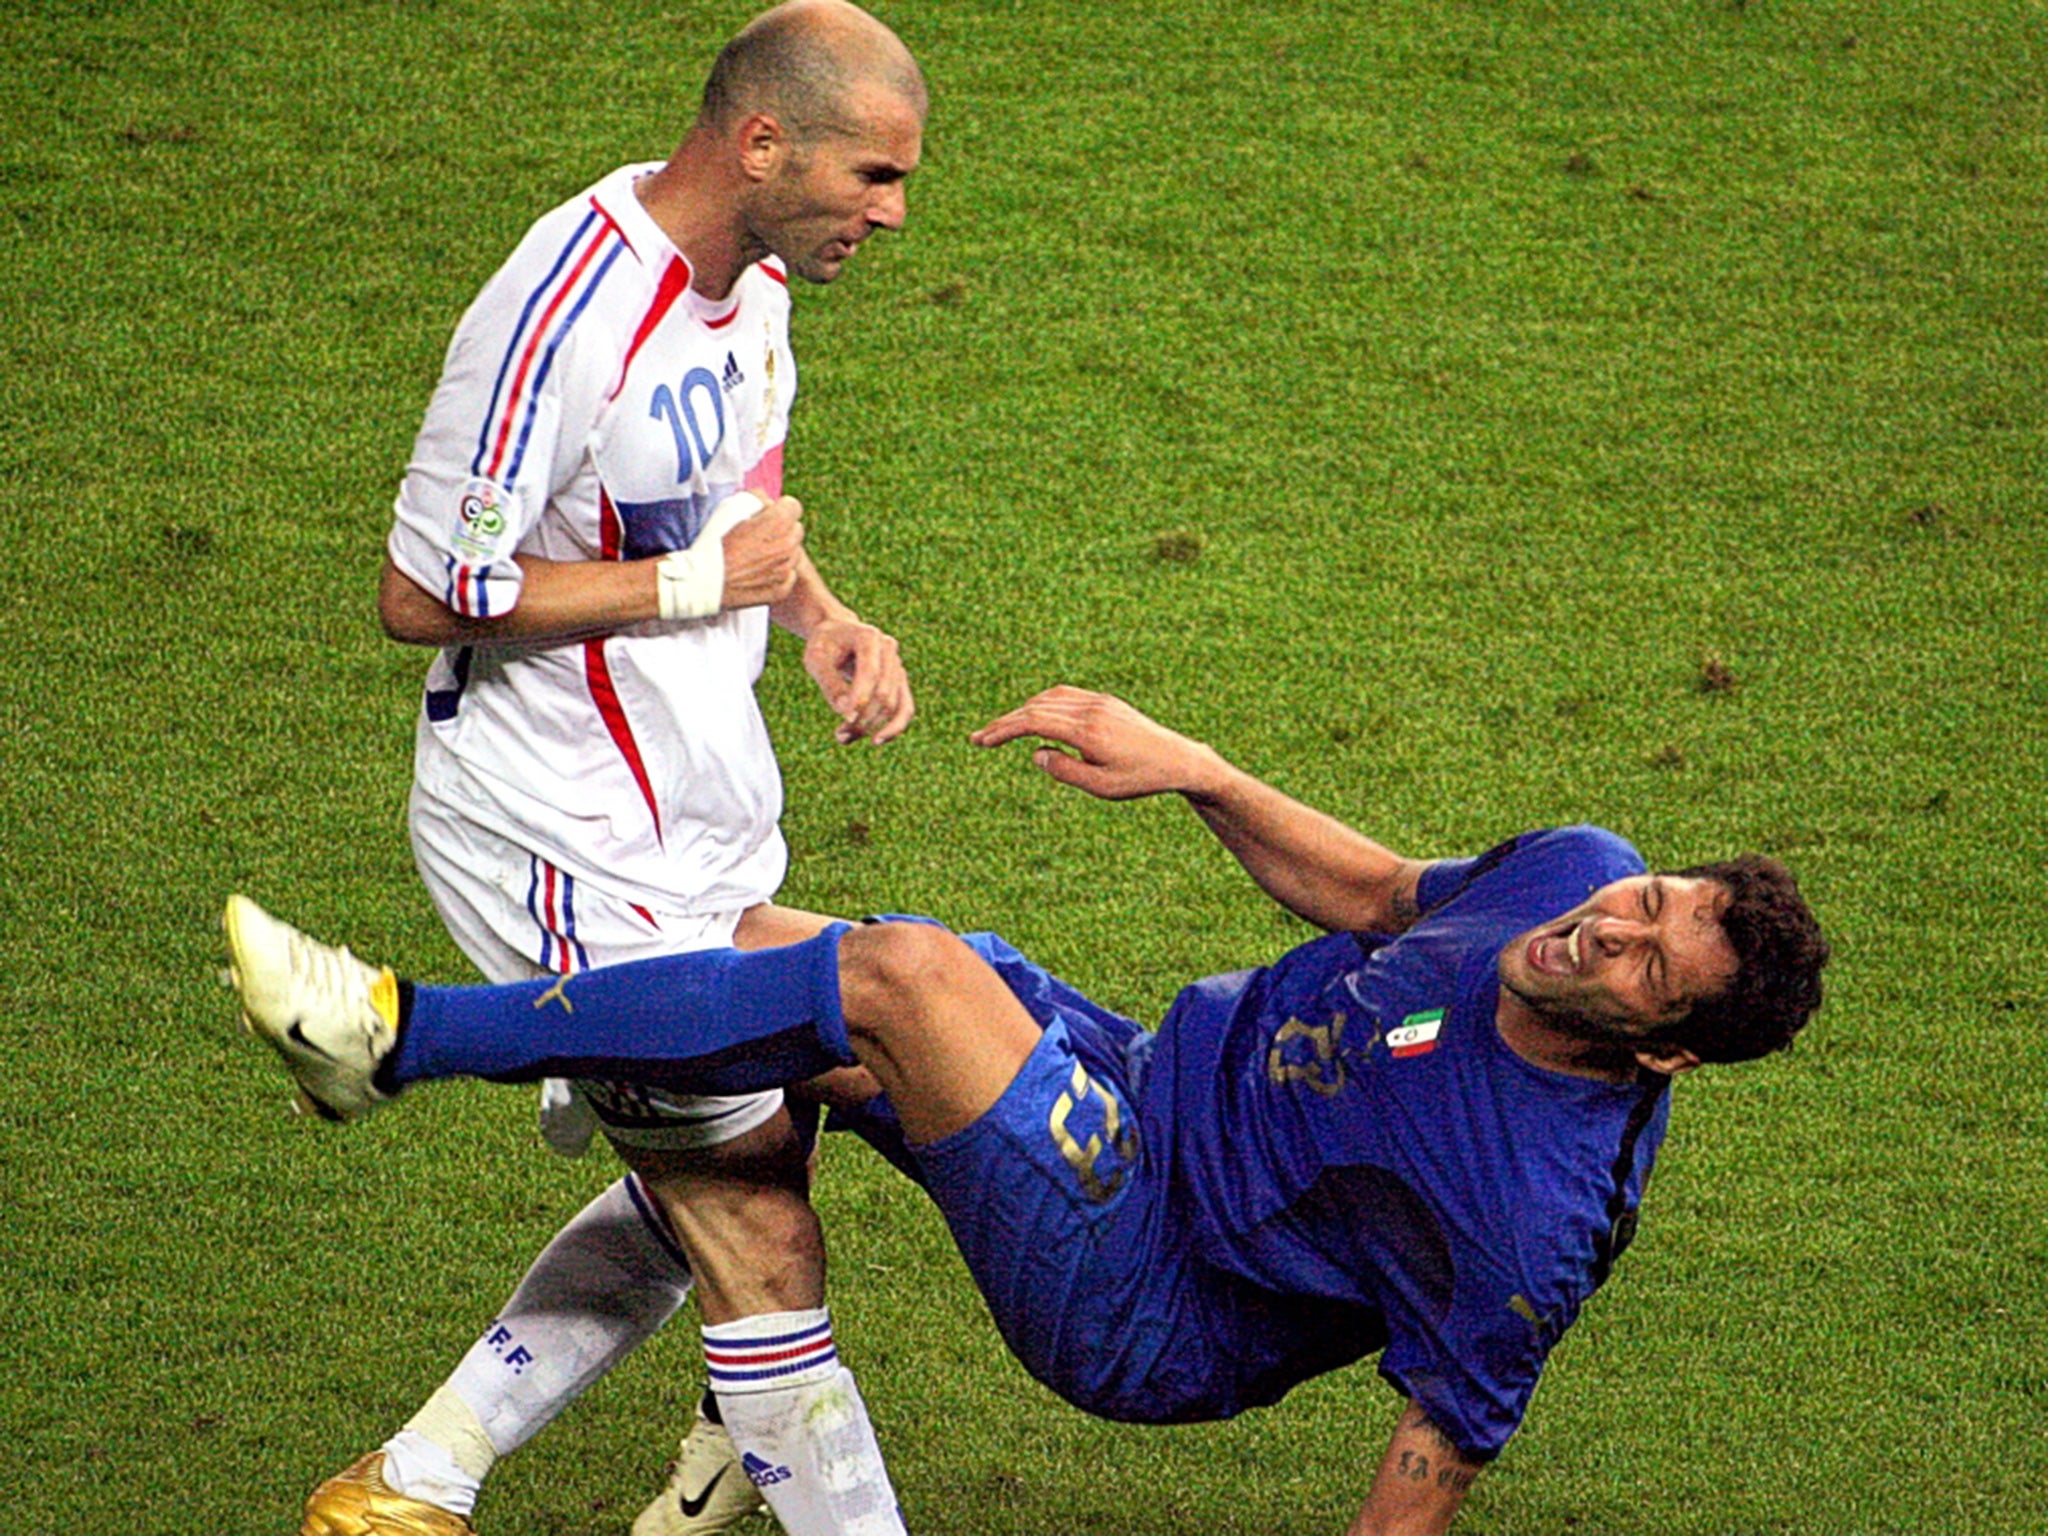 Zinedine Zidane (left), who is ‘not a nice guy’ according to former France coach Raymond Domenech, fells Italy’s Marco Materazzi with a headbutt in the 2006 World Cup final